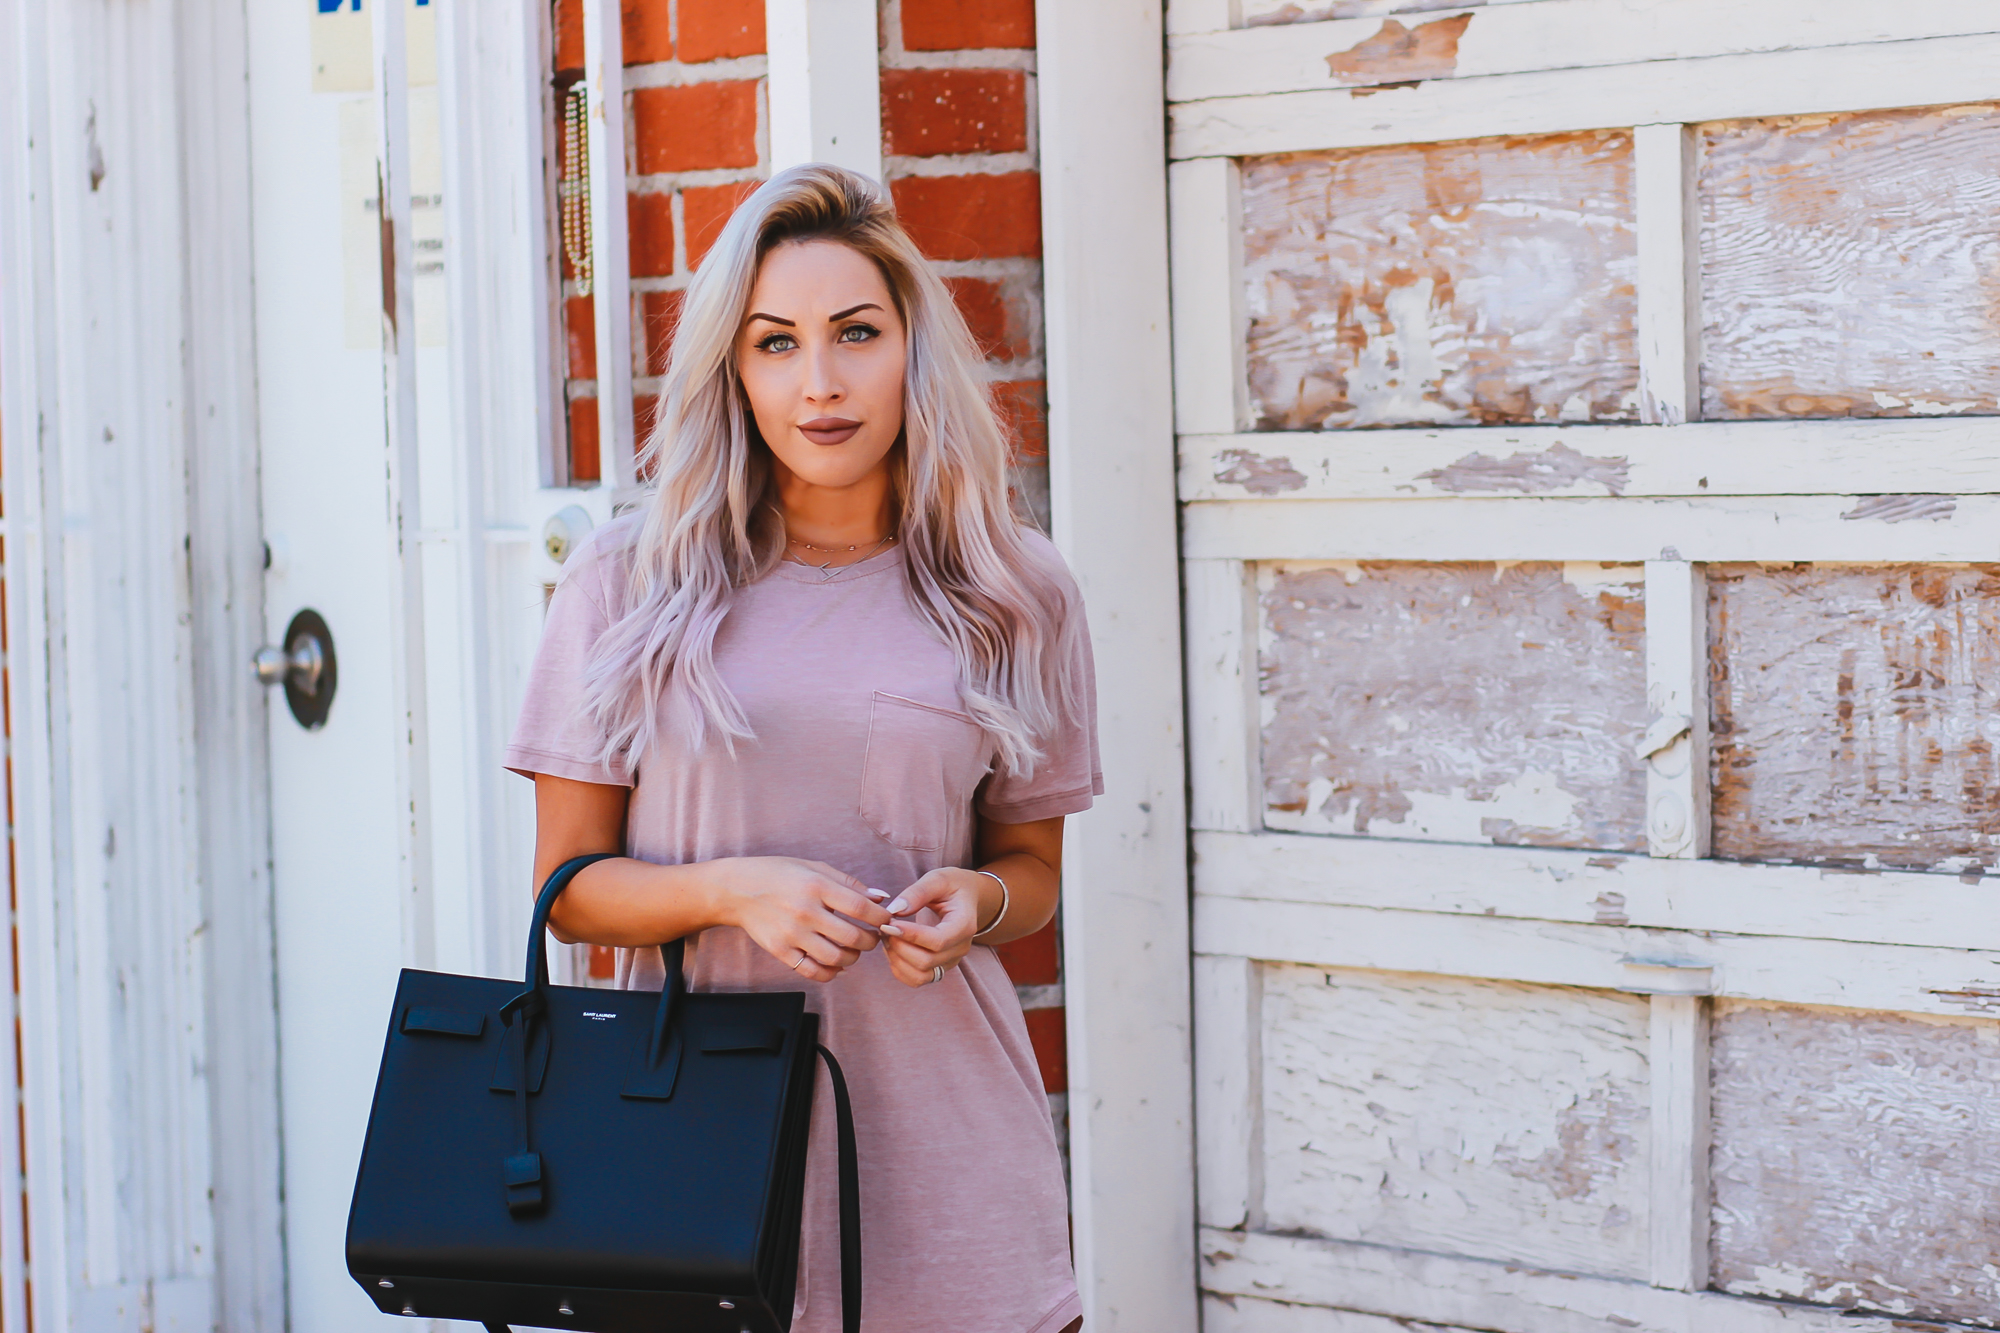 Blondie in the City | Pink Men's Tee from Urban Outfitters as T-Shirt Dress | YSL Bag